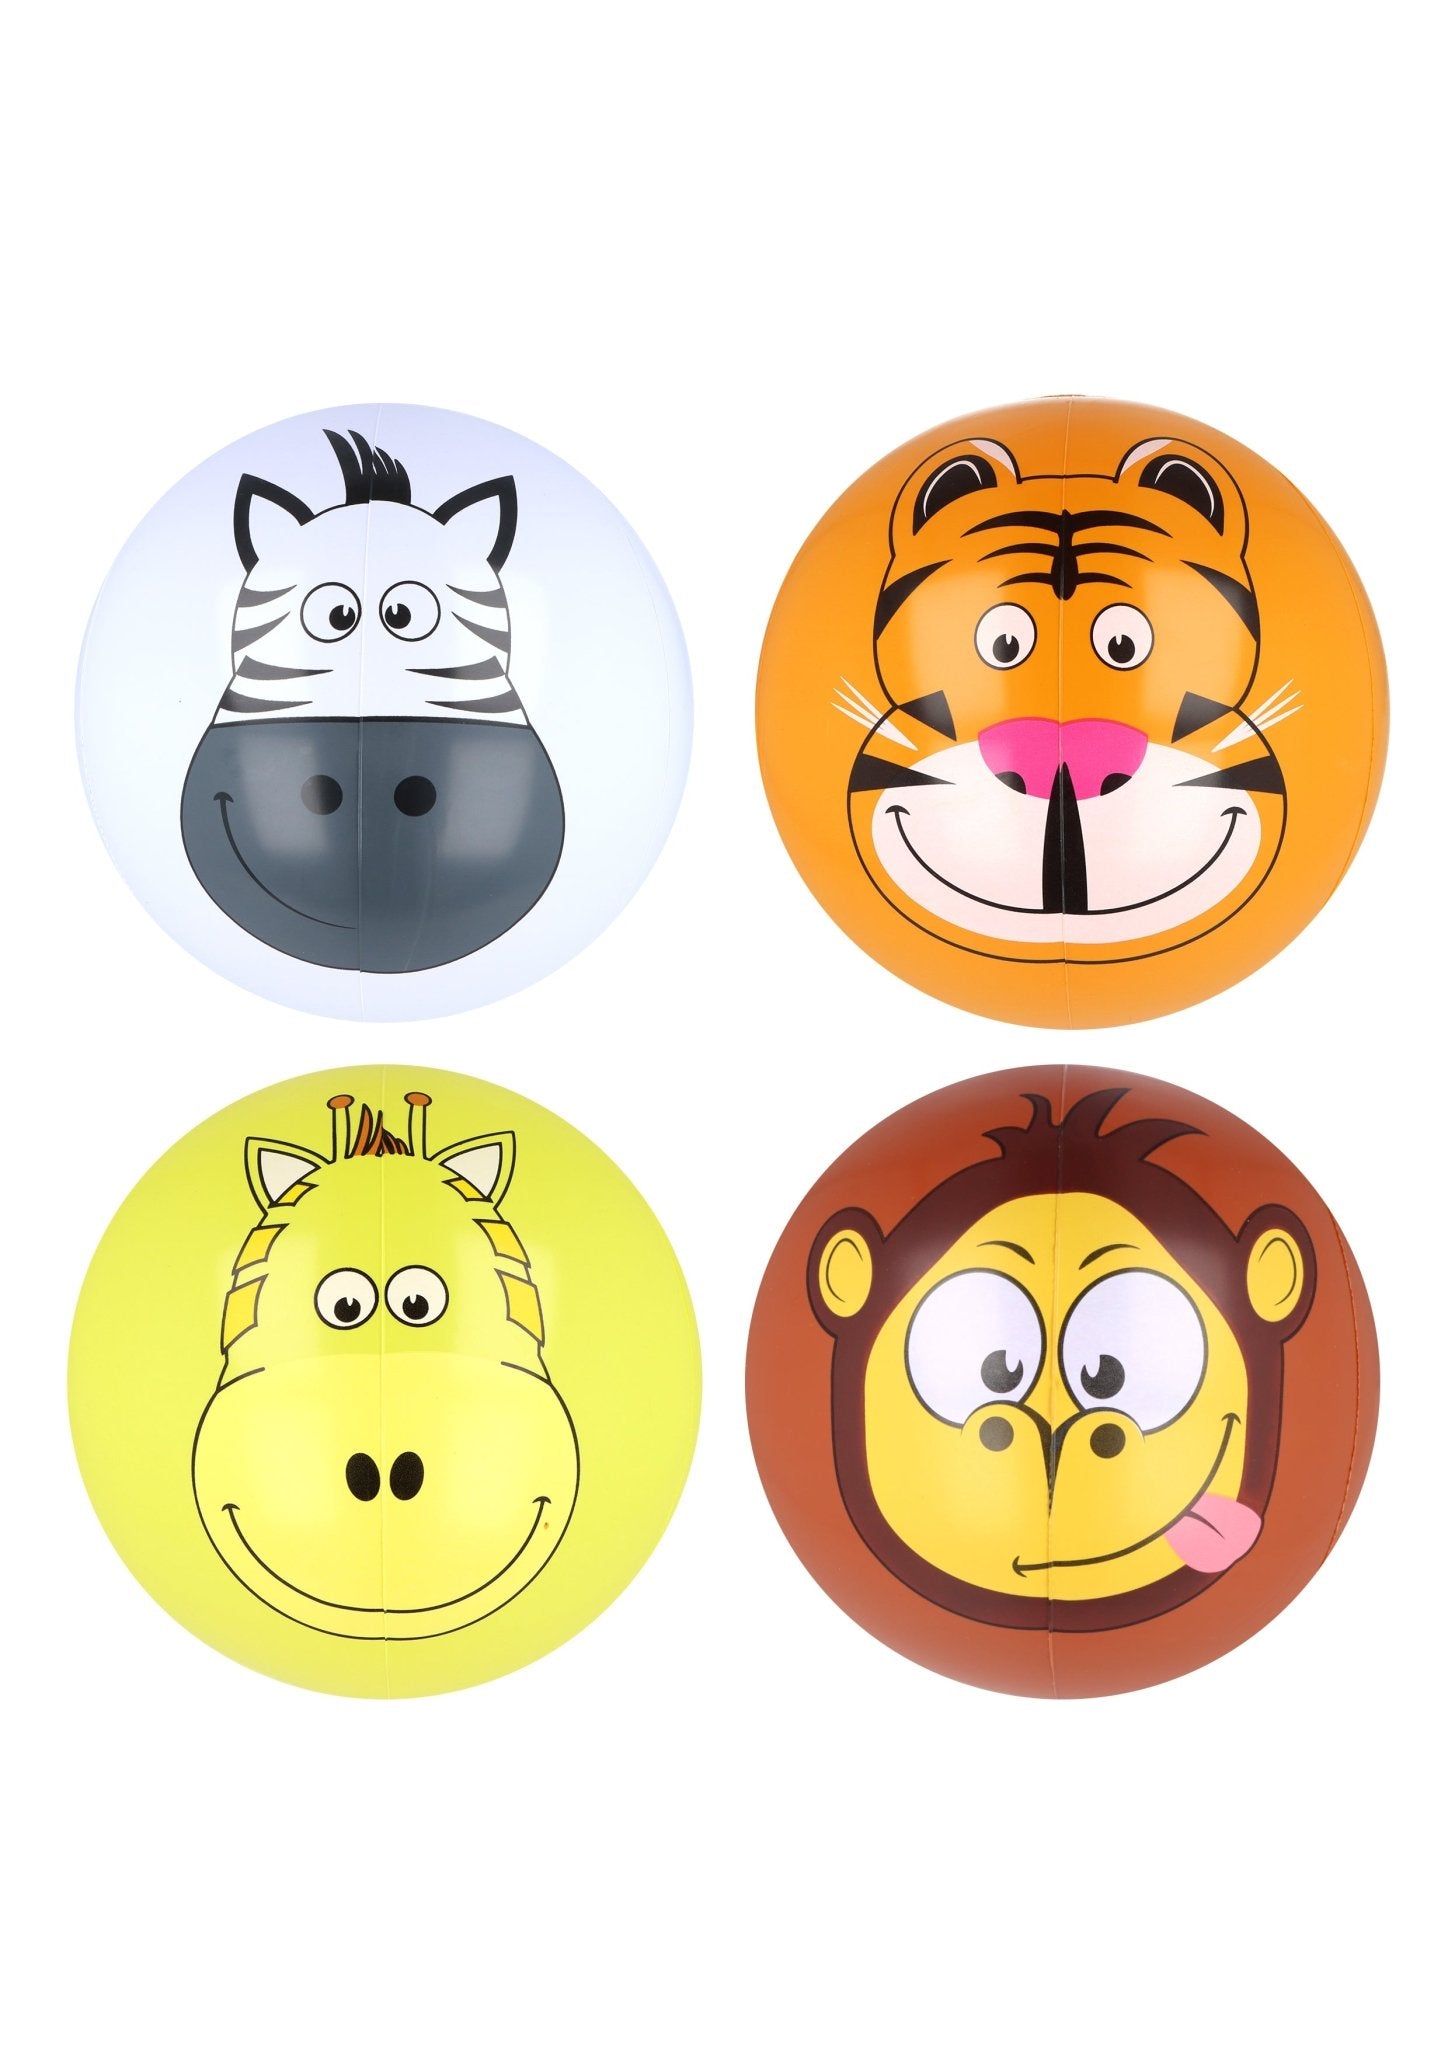 24 x Inflatable Beach Ball with Jungle Faces (30cm) 4 Assorted Designs - Bulk Bargain